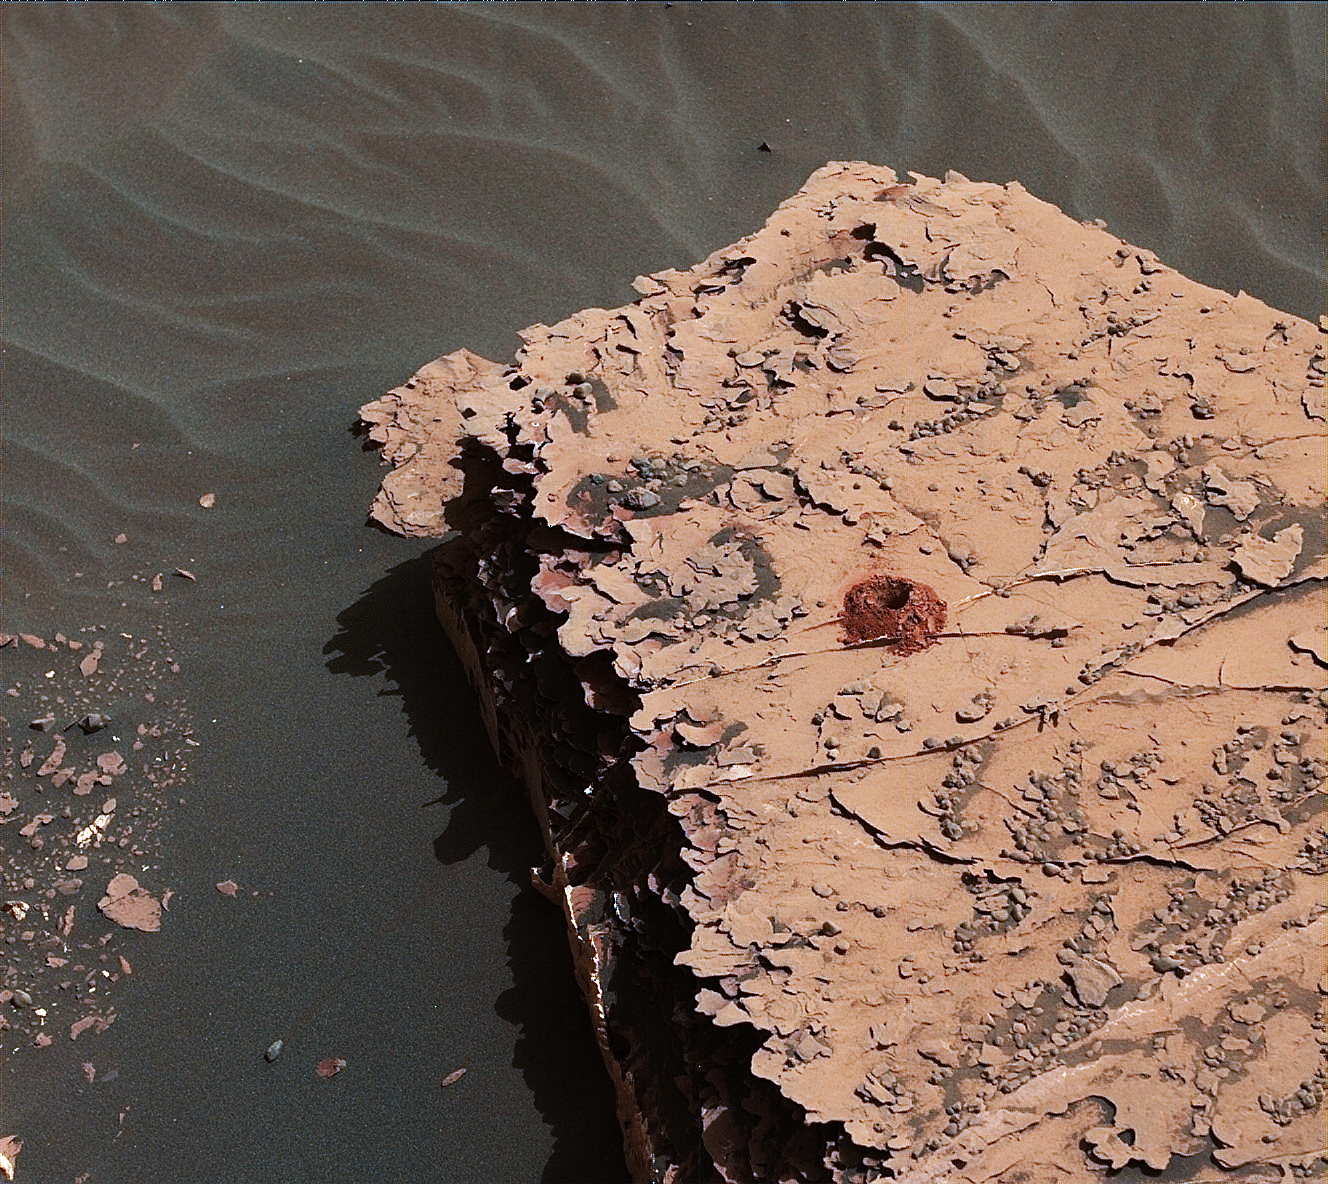 NASA's Curiosity rover successfully drilled a 2-inch-deep hole in a target called "Duluth" on May 20. It was the first rock sample captured by the drill since October 2016. This image was taken by Curiosity's Mast Camera (Mastcam) on Sol 2057.